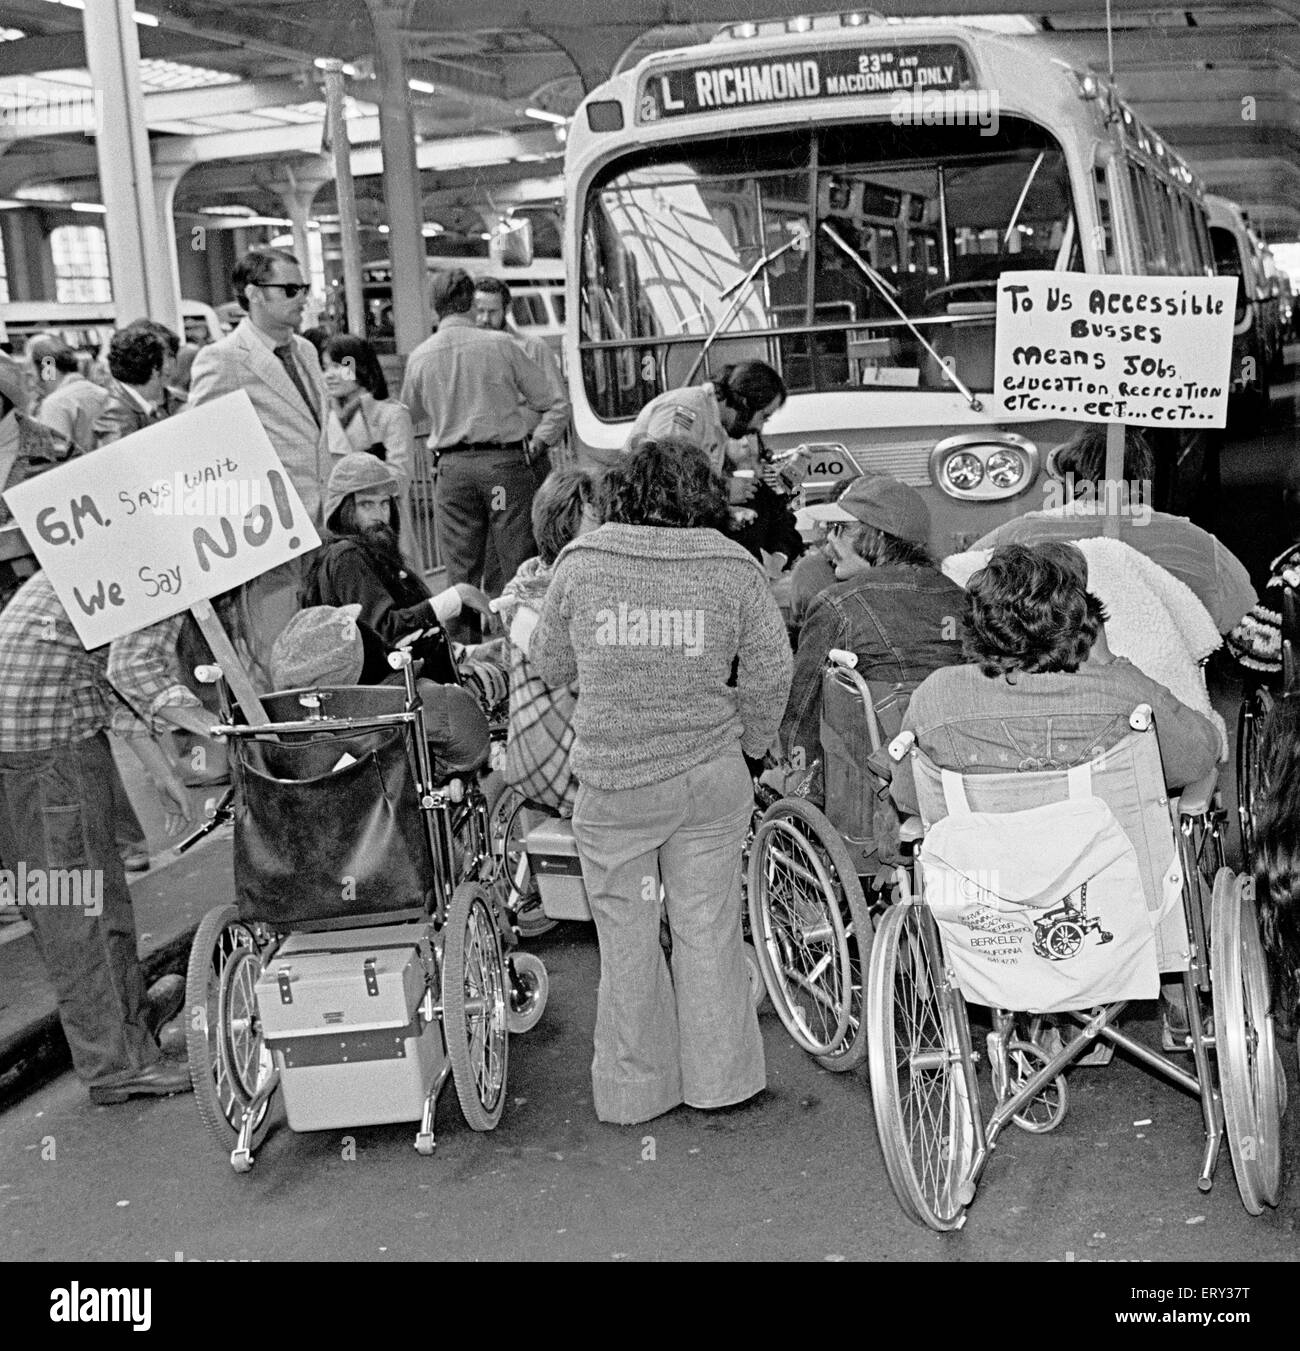 disabled activist protest lack of access to public transit. 1970s Stock Photo